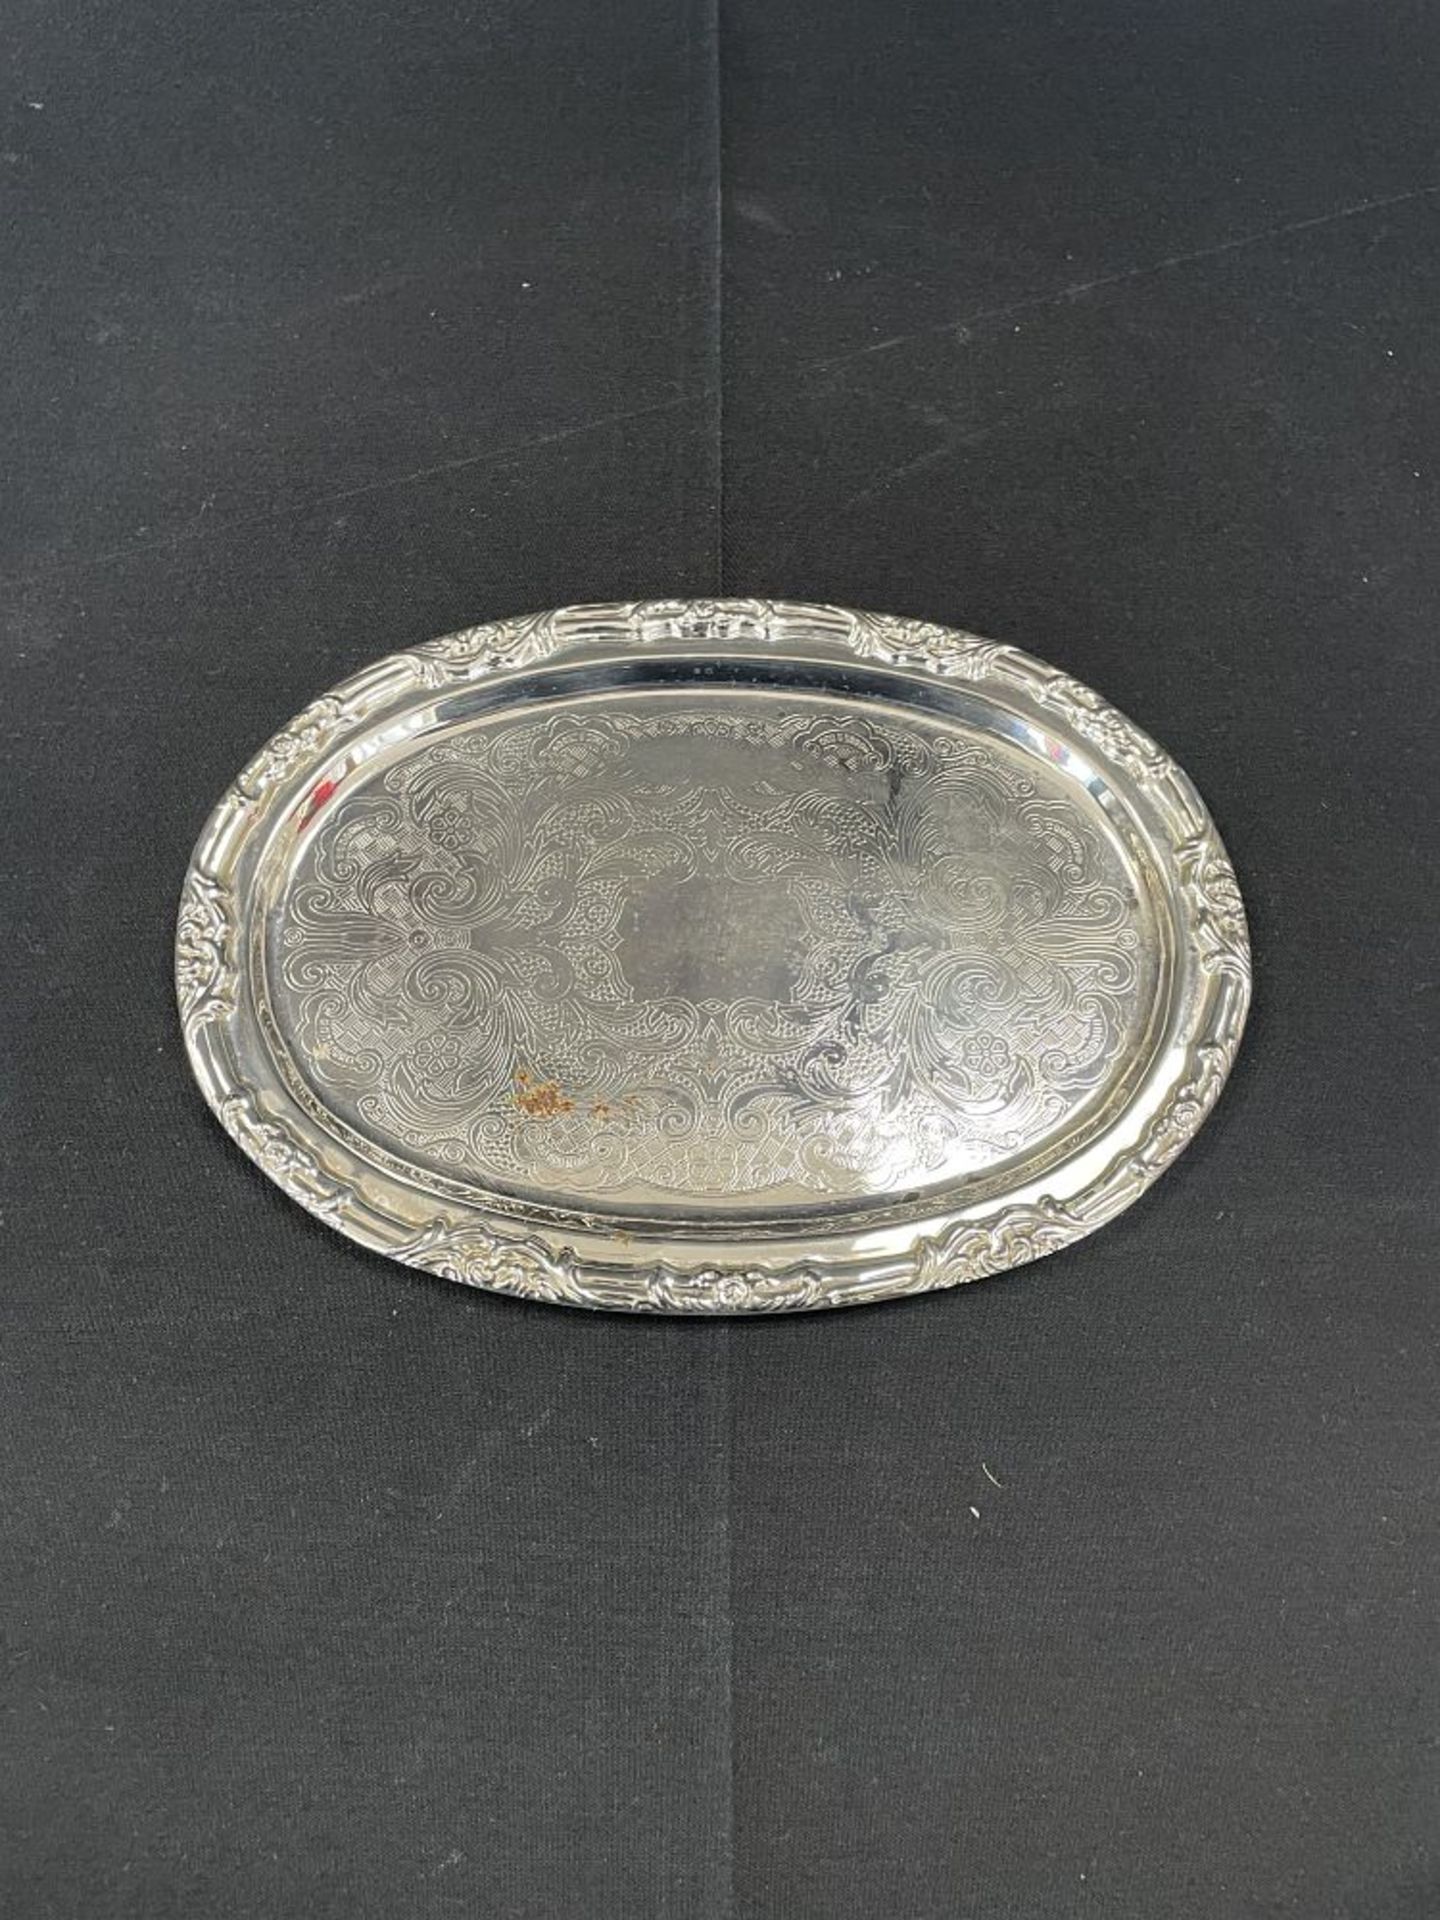 7"x9.5" Oval Silver Plate Serving Tray